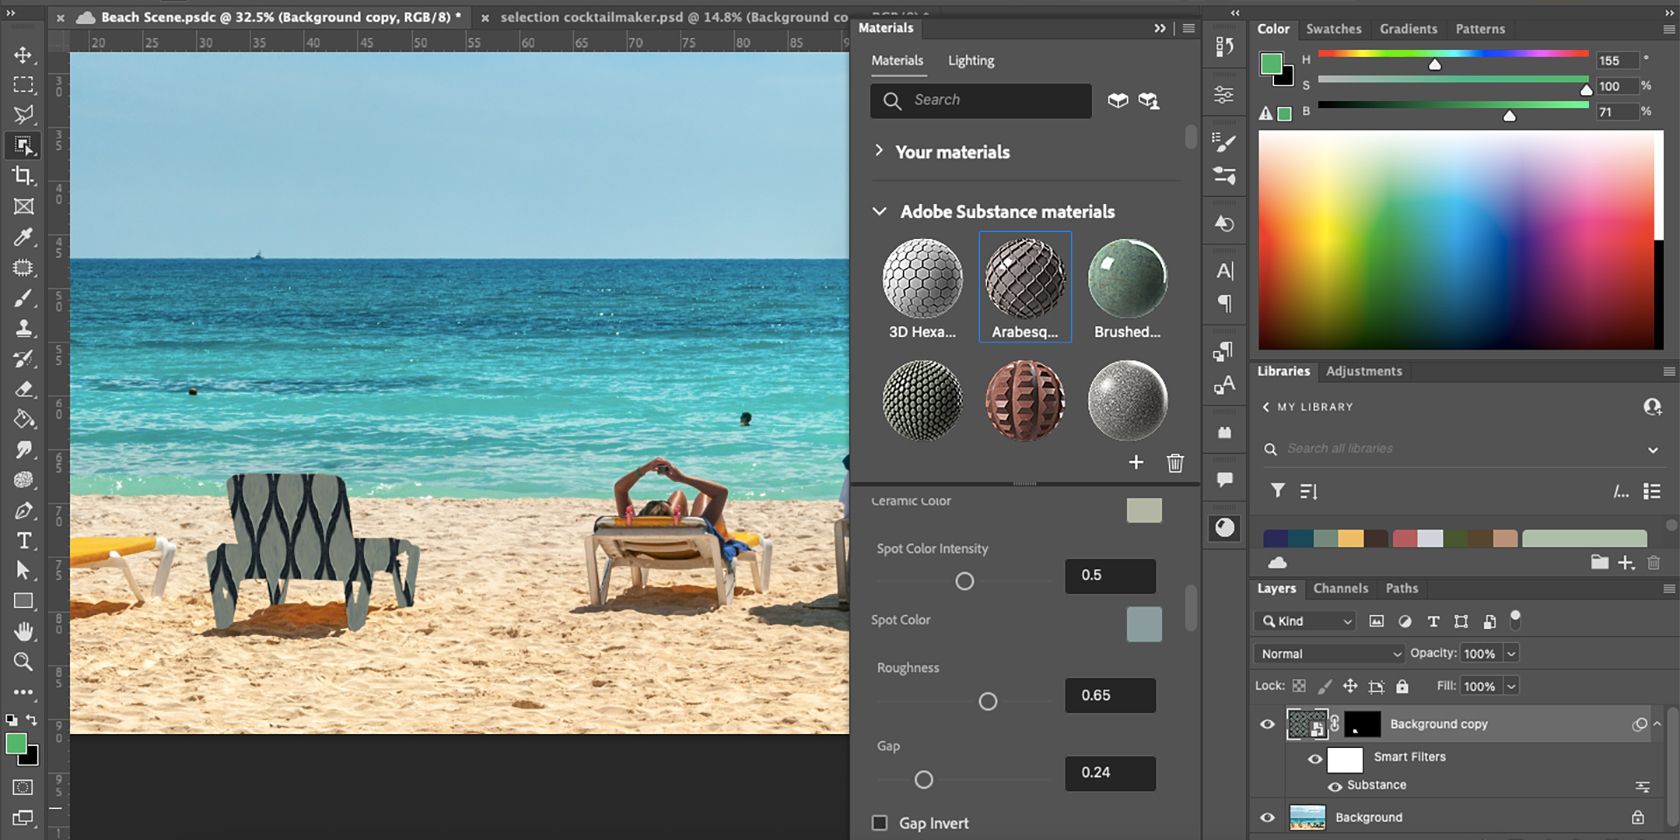 Photoshop with substance materials menu and texture on object